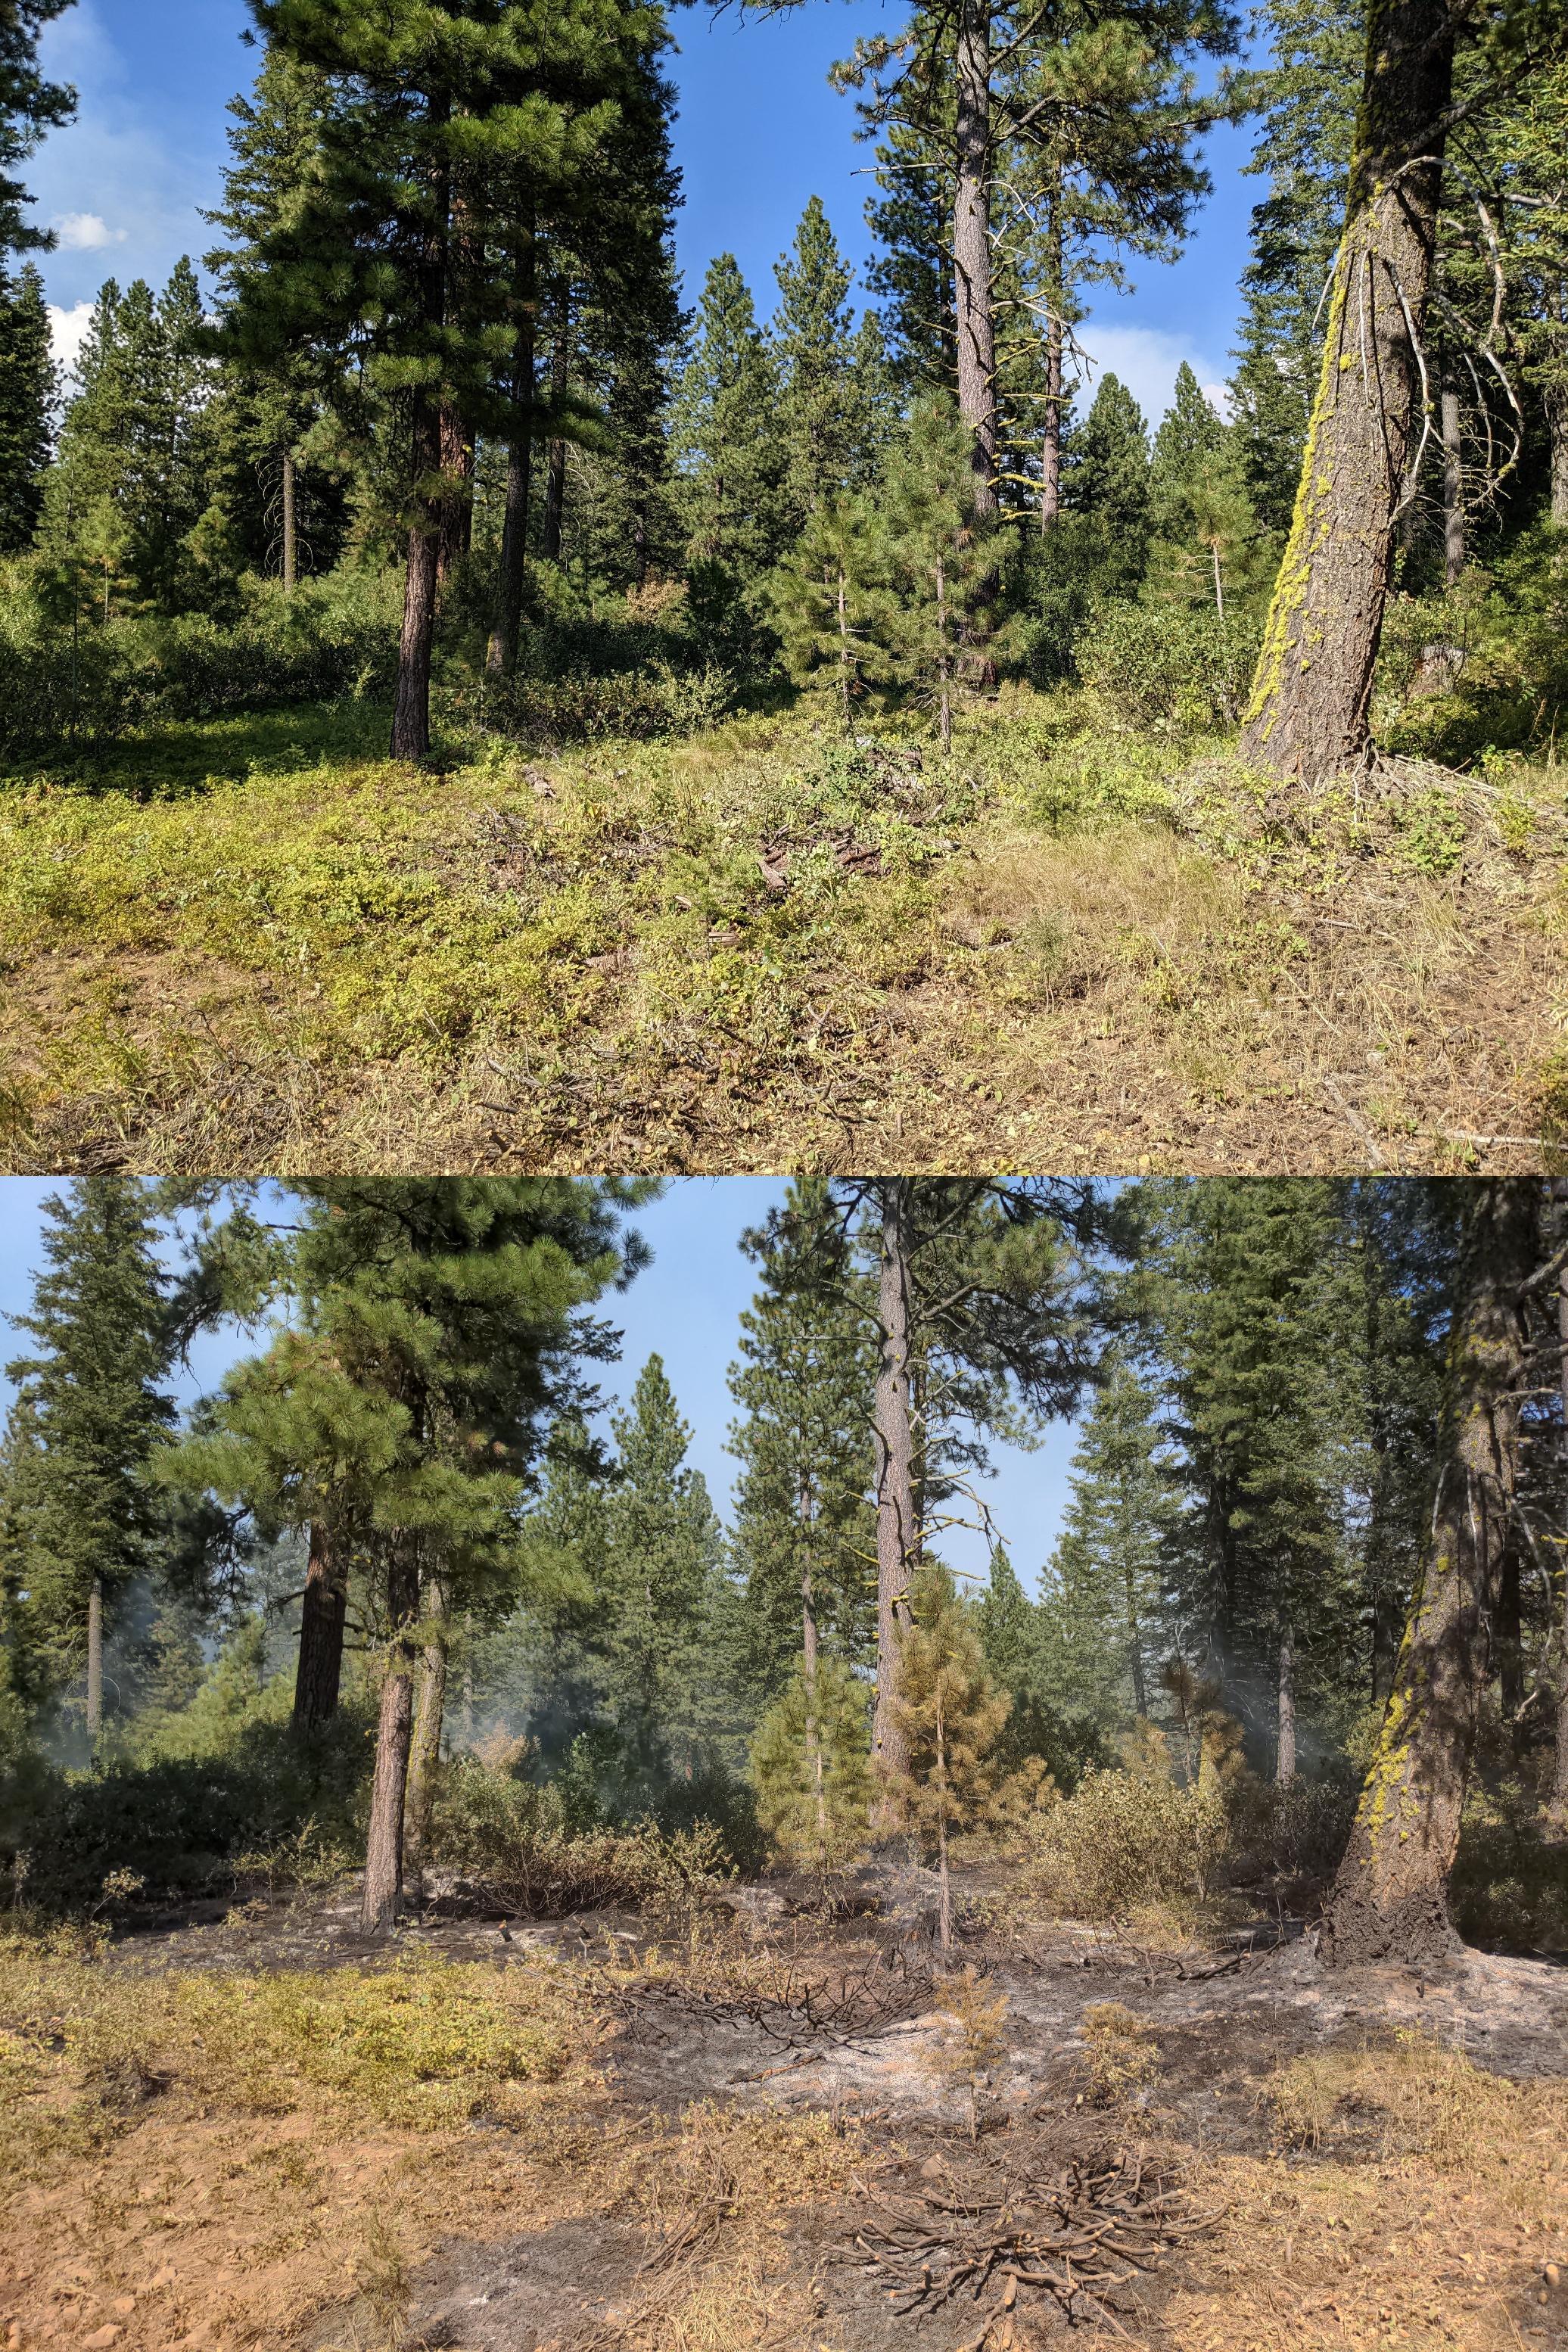 Two photos of area showing the effects of burnout operations.